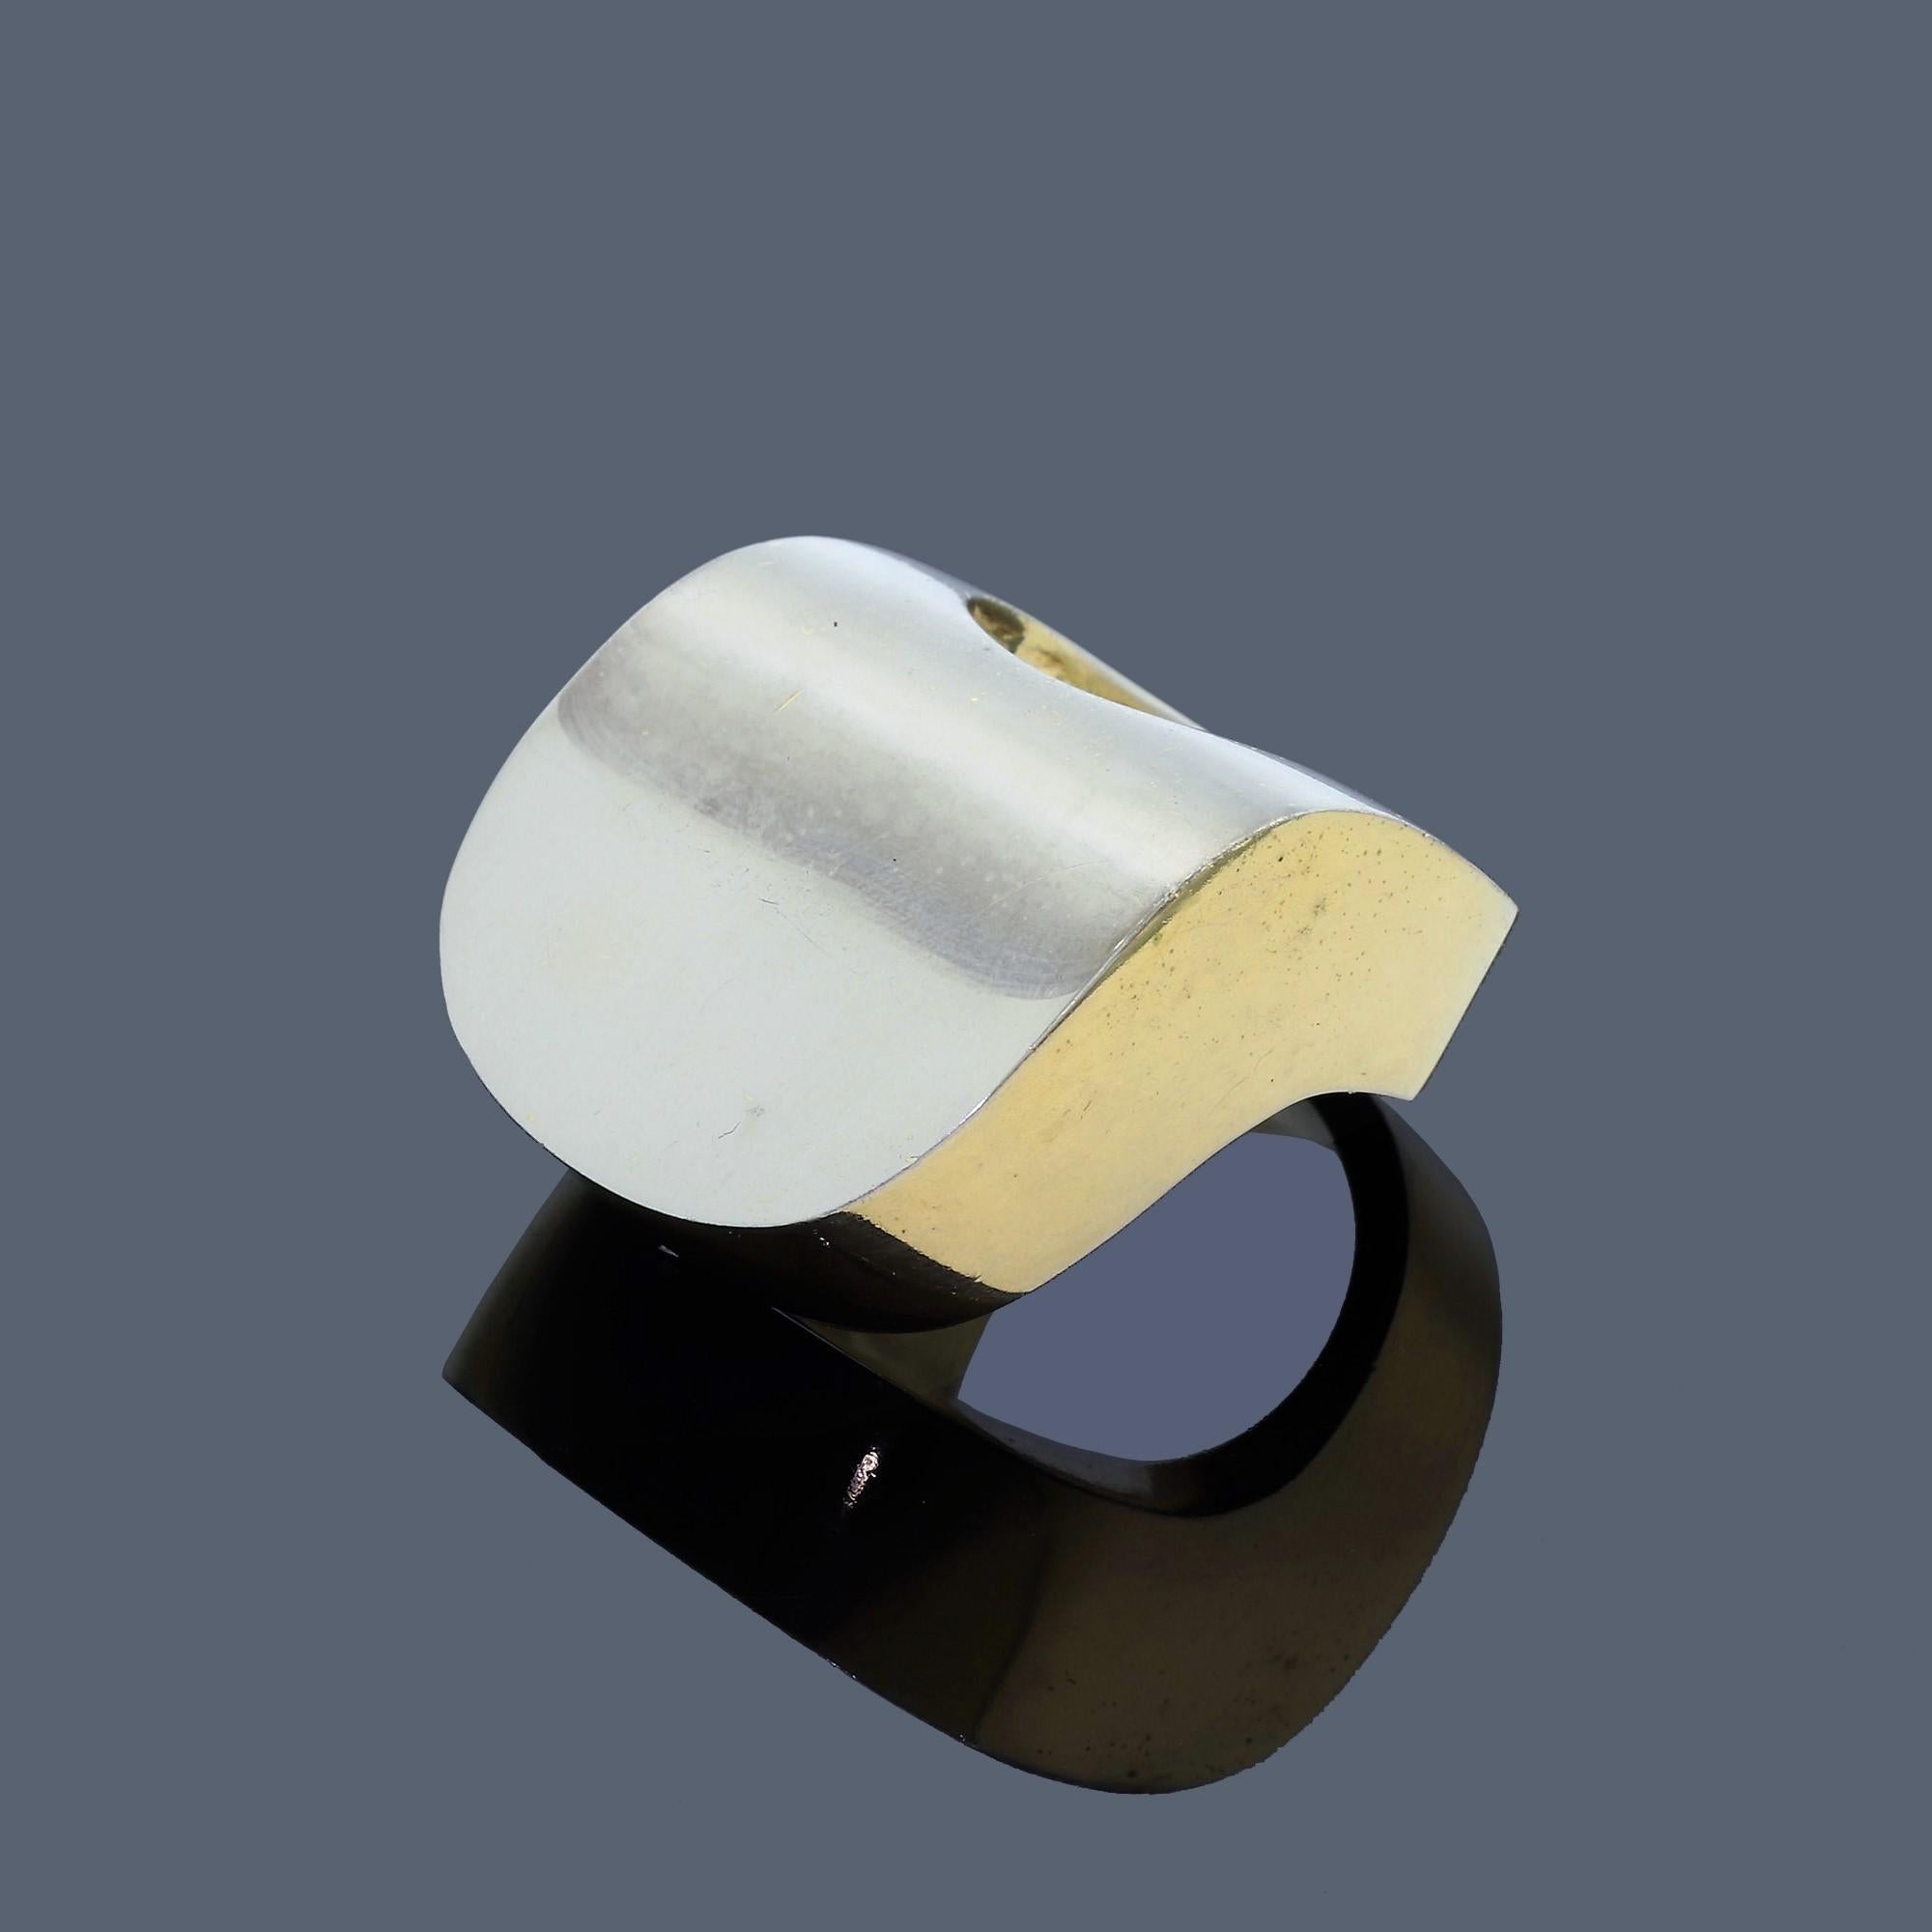 This fantastic Patricia Von Musulin ring is on a league of its' own. From the bold, large, abstract-modern design, to the striking two-tone vermeil aesthetic, this ring is guaranteed to strike an impression. It was created by the celebrated artist